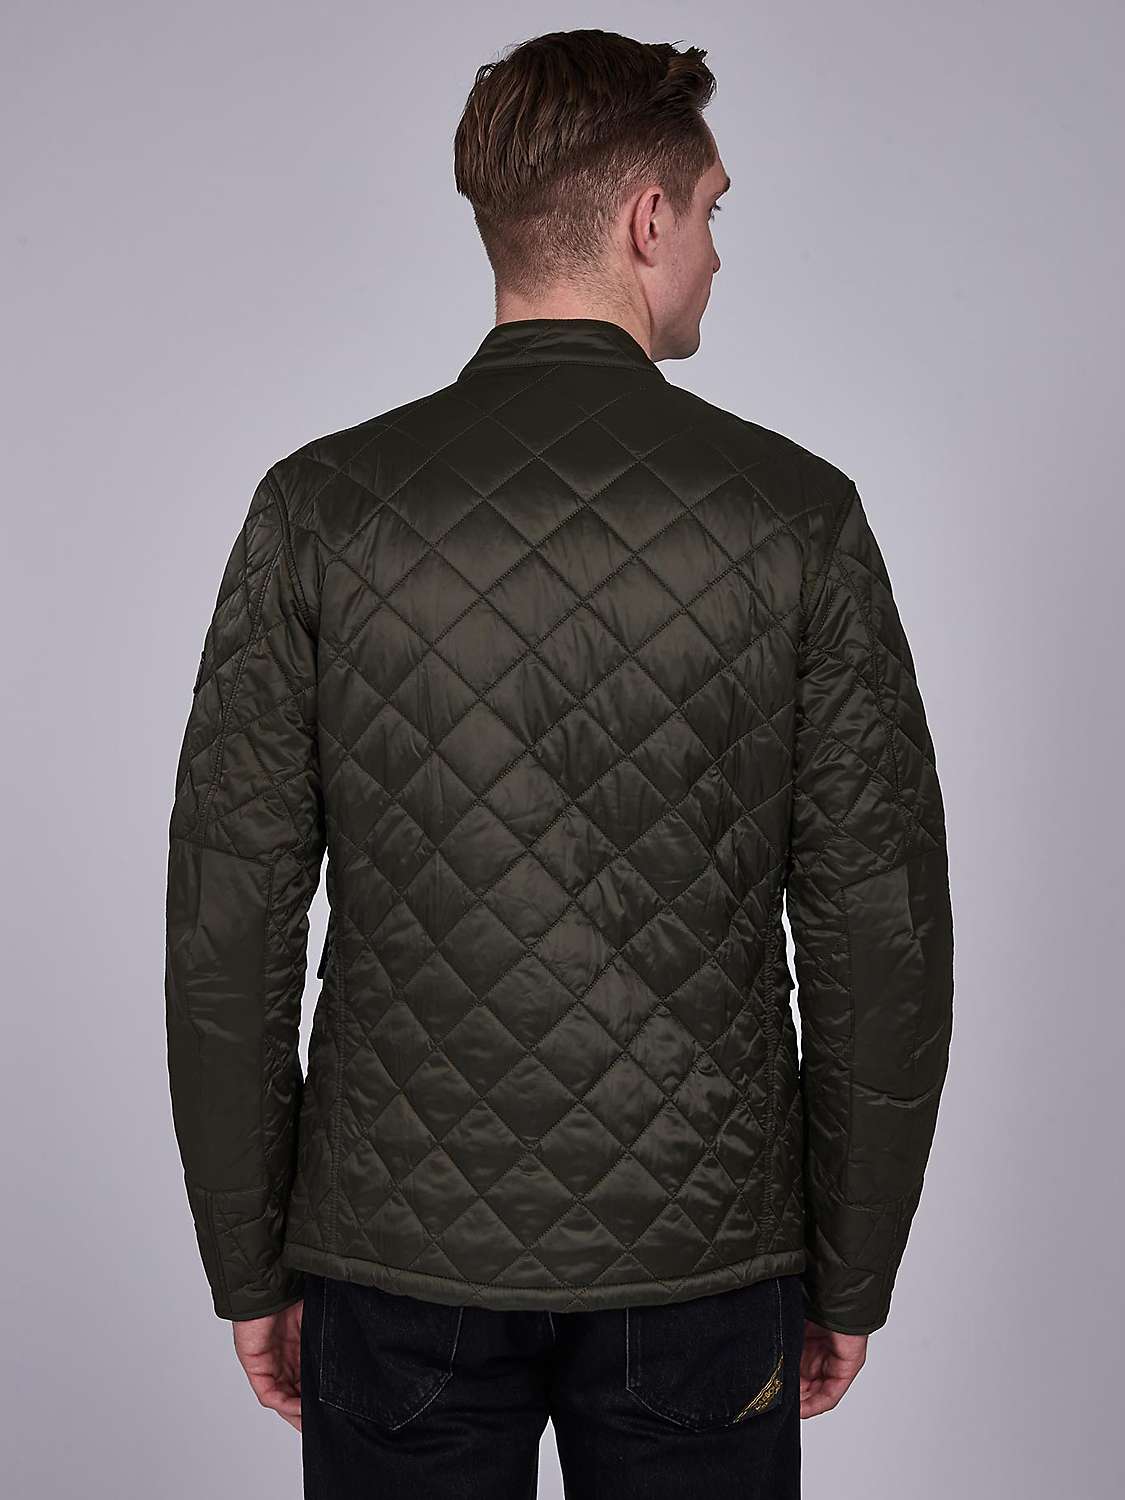 Barbour International Ariel Soft Touch Quilted Jacket, Sage at John ...